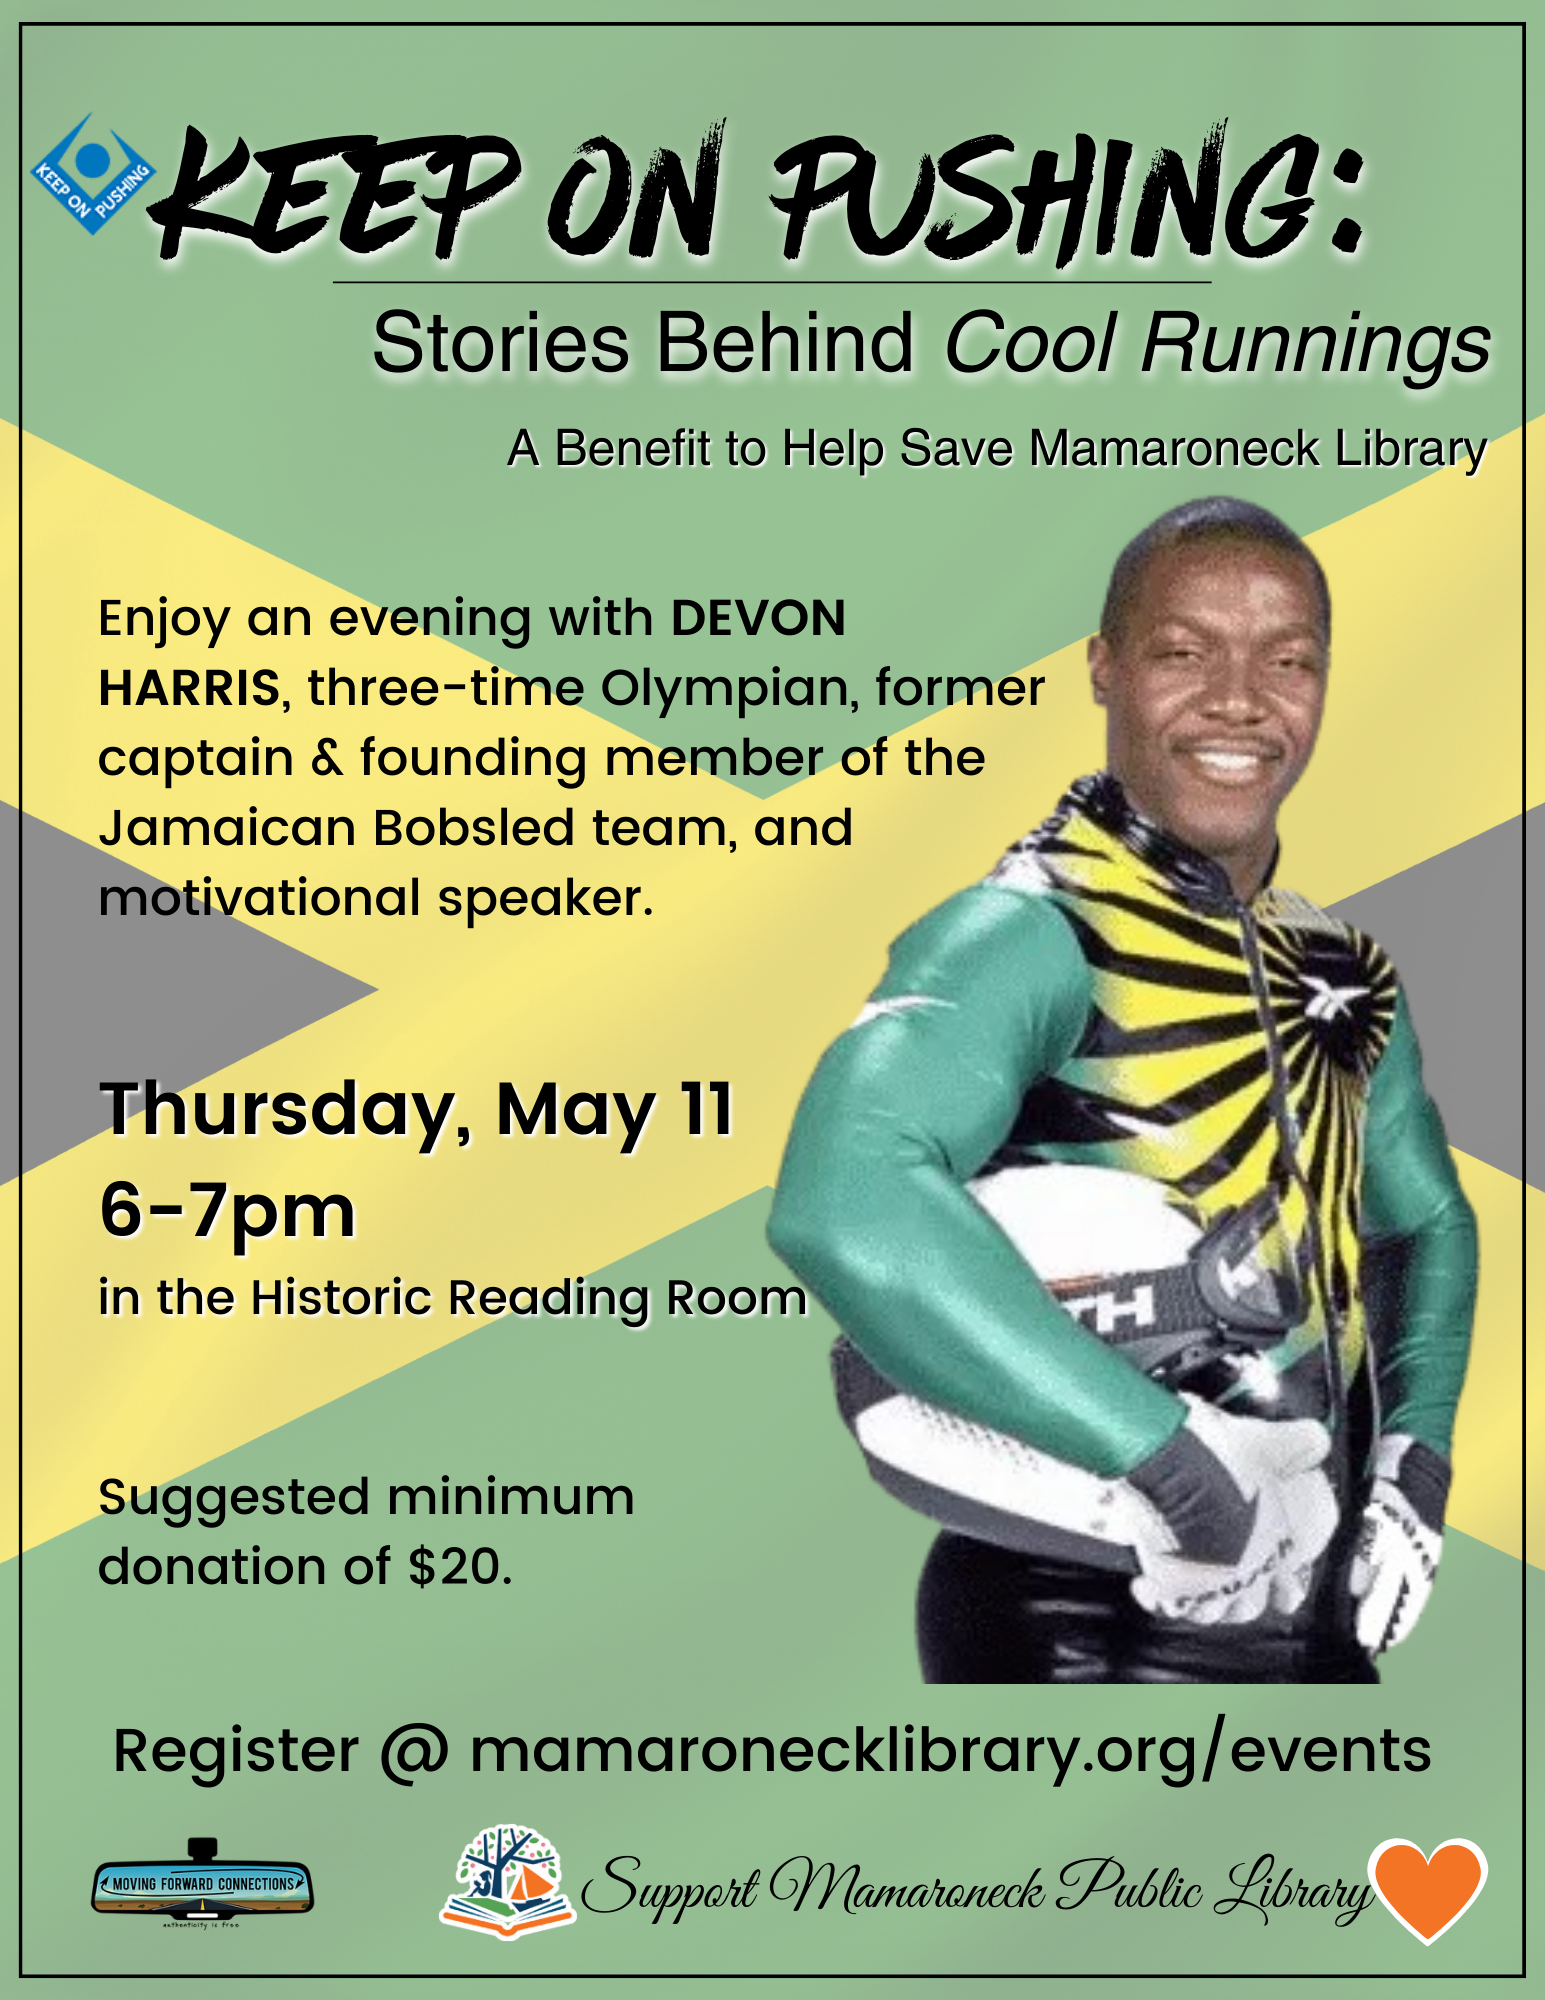 5/11 @ 6-7pm Cool Runnings fundraiser in the Reading Room